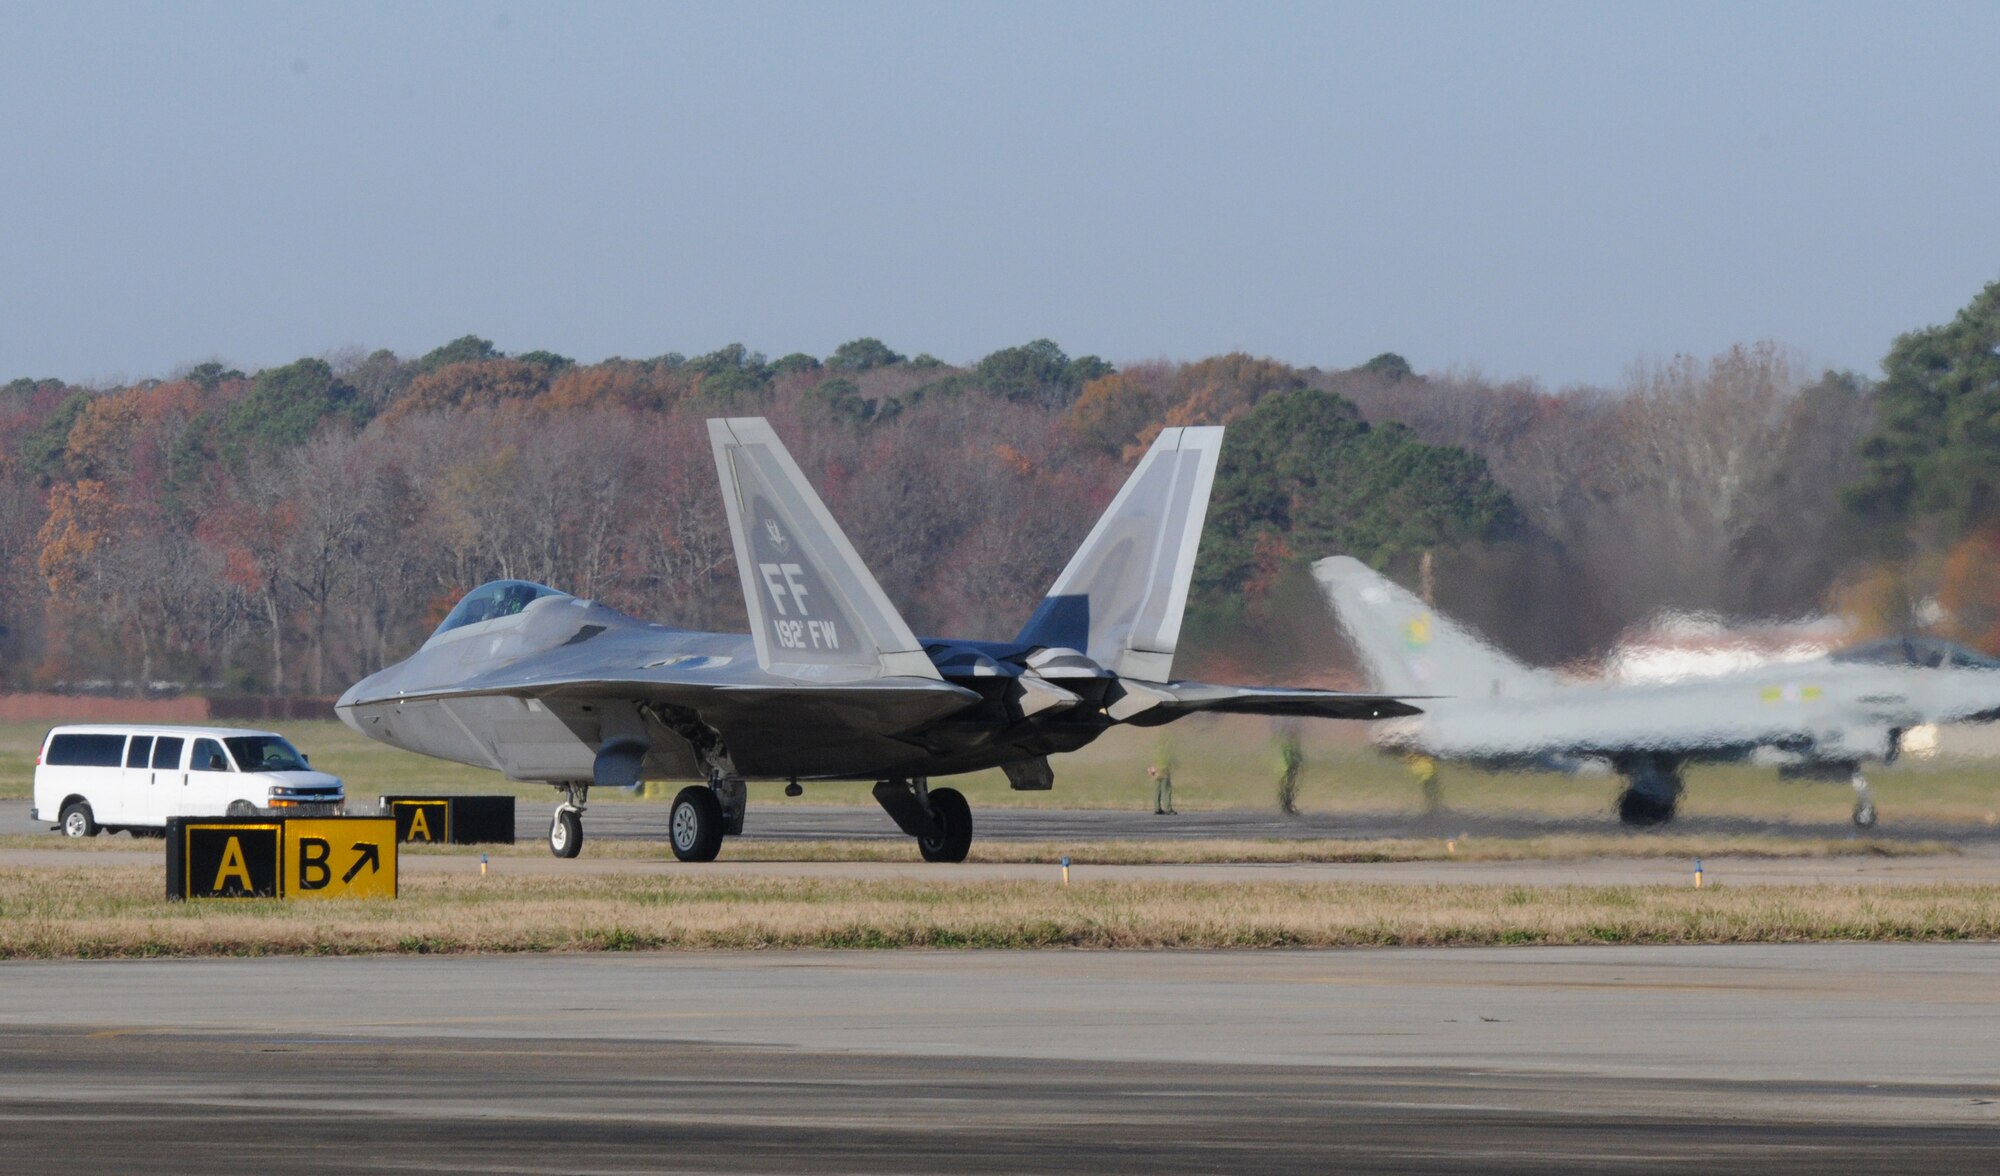 A U.S. Air Force F-22 Raptor with 192FW on its tail participates in the inaugural Trilateral Exercise held at Langley Air Force Base, Va., Dec. 8, 2015. The Raptor is capable of receiving information from a multitude of airborne and ground based platforms, then directing other assets to aid in mission success or away from potential threats. (U.S. Air National Guard photo by Master Sgt. Carlos Claudio/Released).